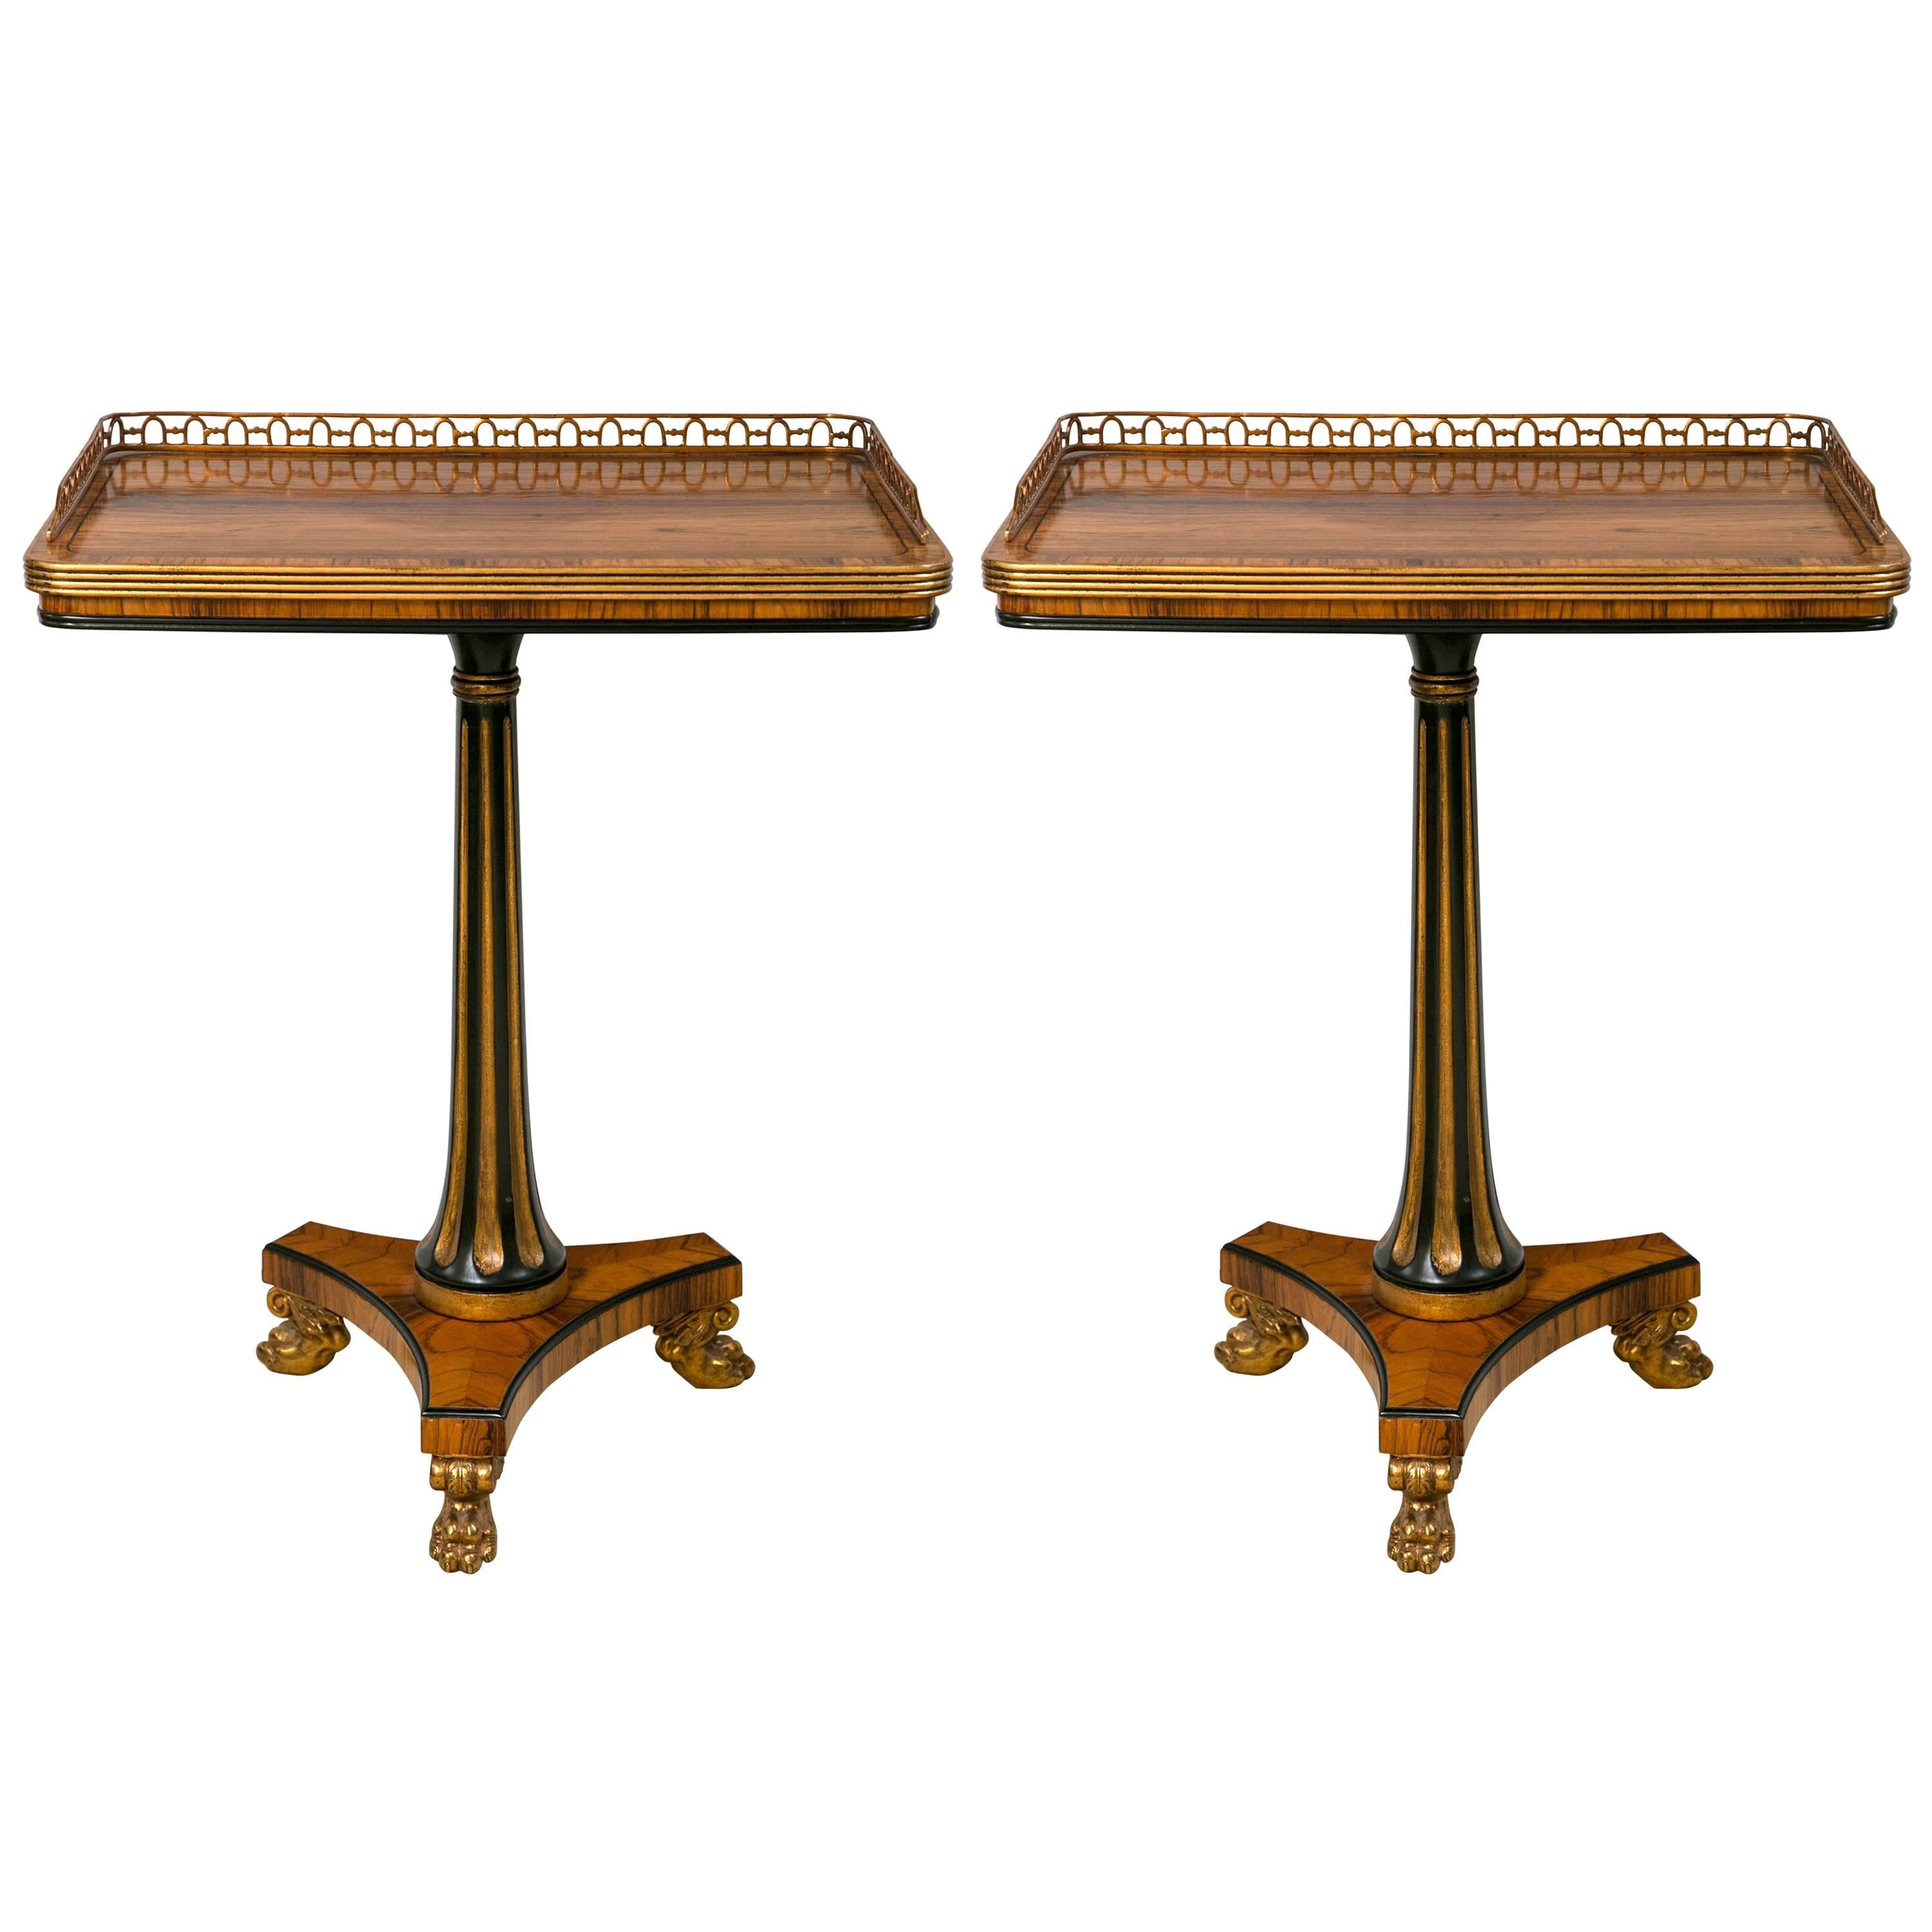 Pair of Rosewood Georgian Style Satinwood Inlaid End Tables with Paw Feet